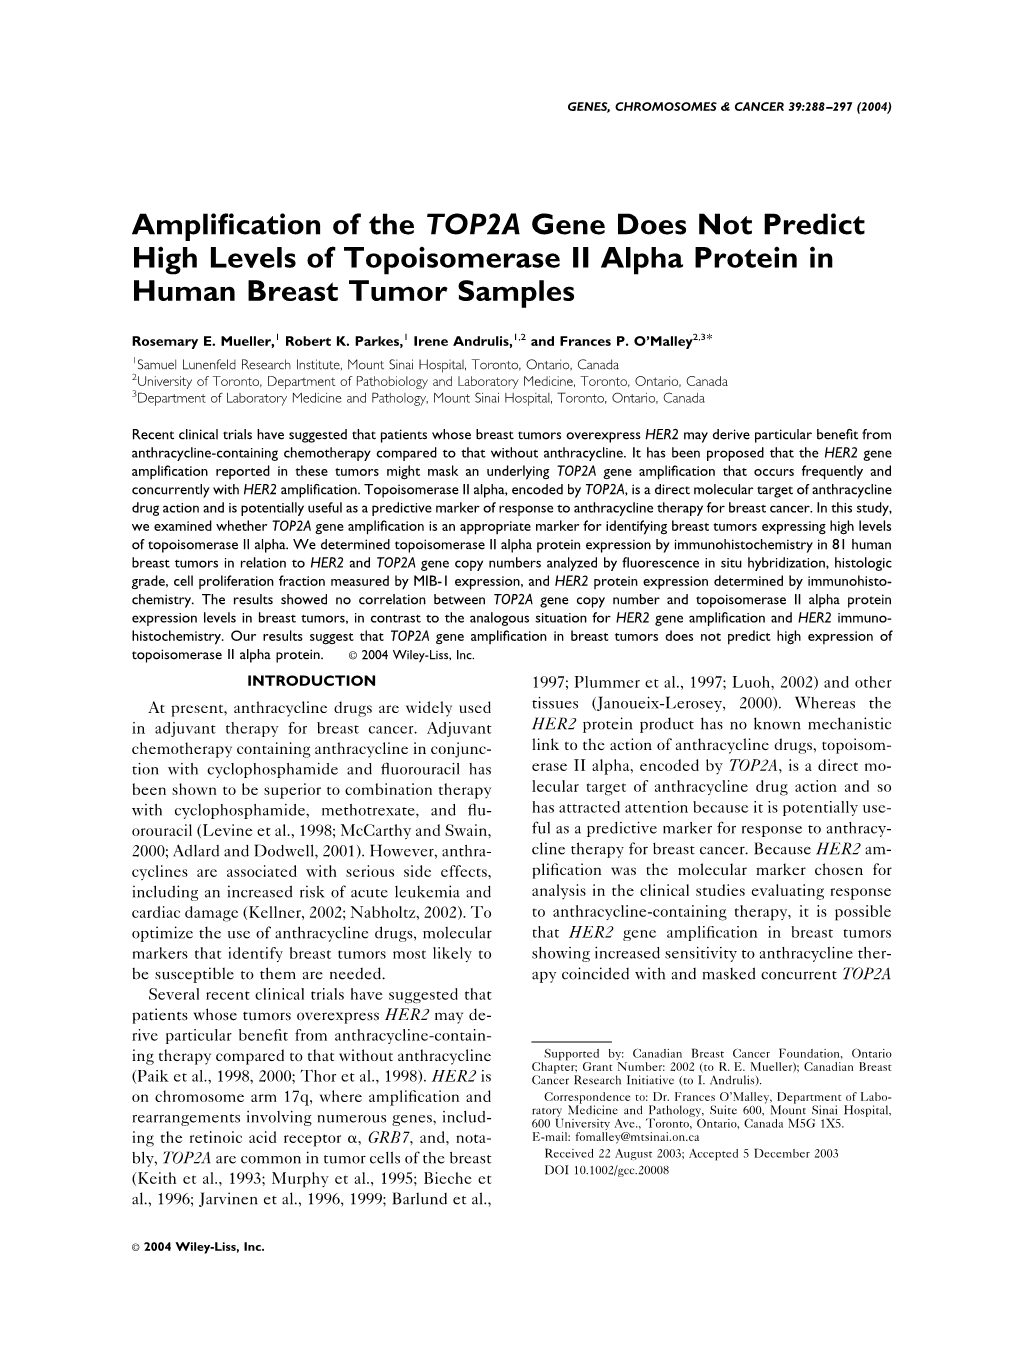 Amplification of the TOP2A Gene Does Not Predict High Levels Of